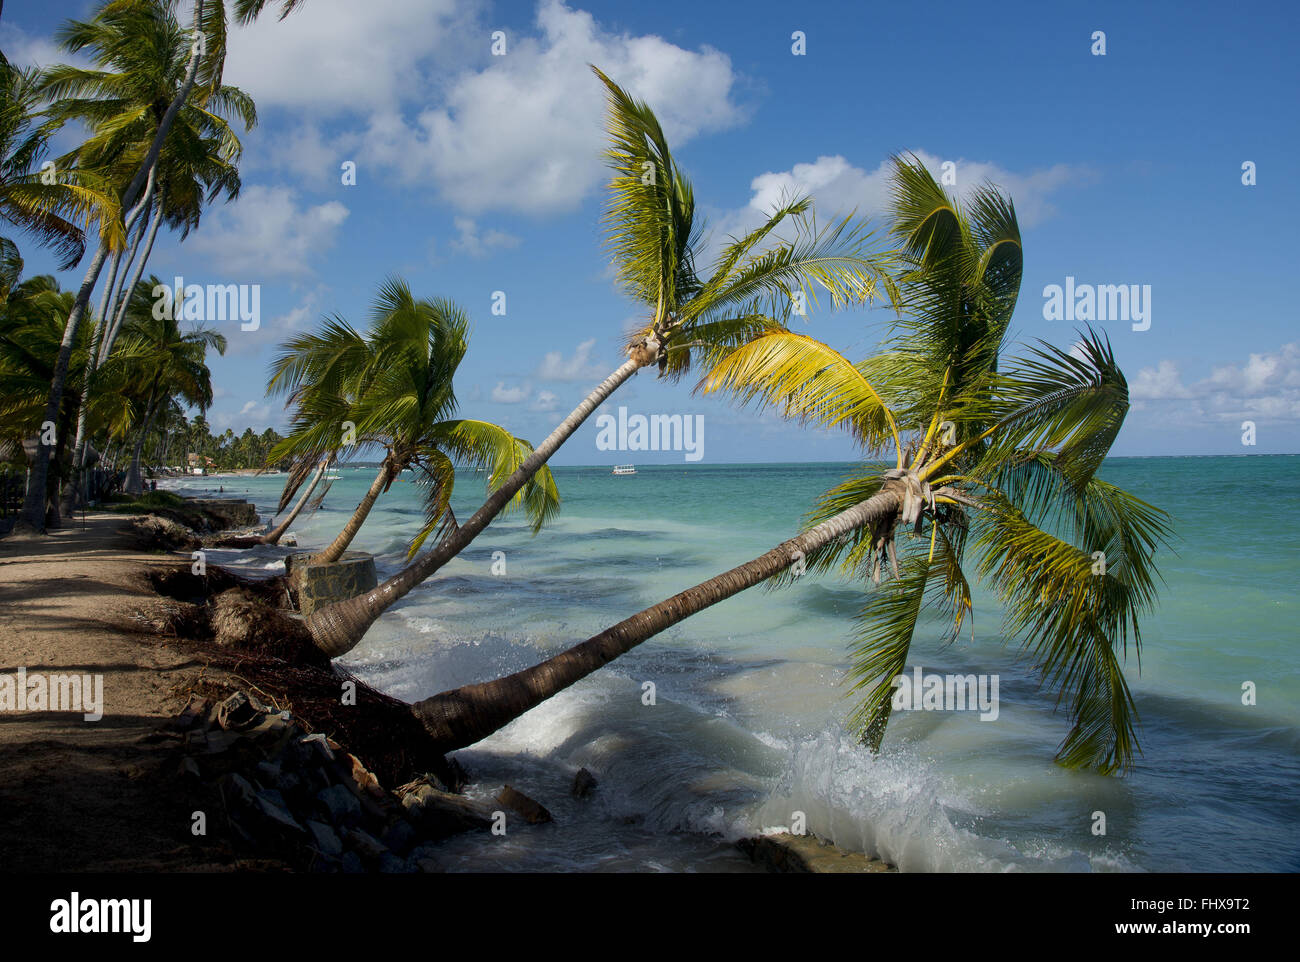 Coconut trees tumbled by the advancement of the mare at the beach Ponta do Mangue Stock Photo